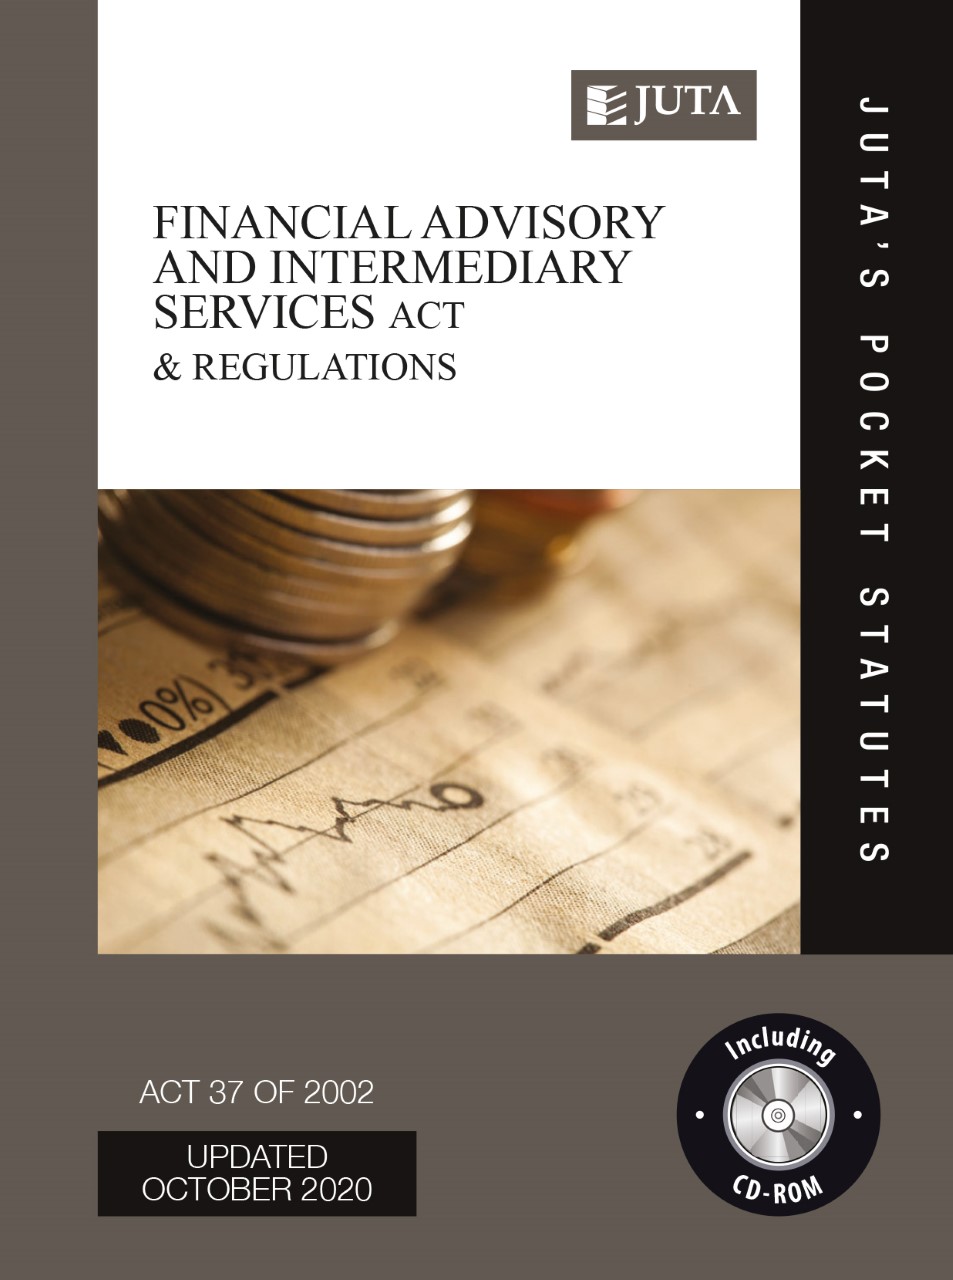 Financial Advisory and Intermediary Services Act 37 of 2002 & Regulations